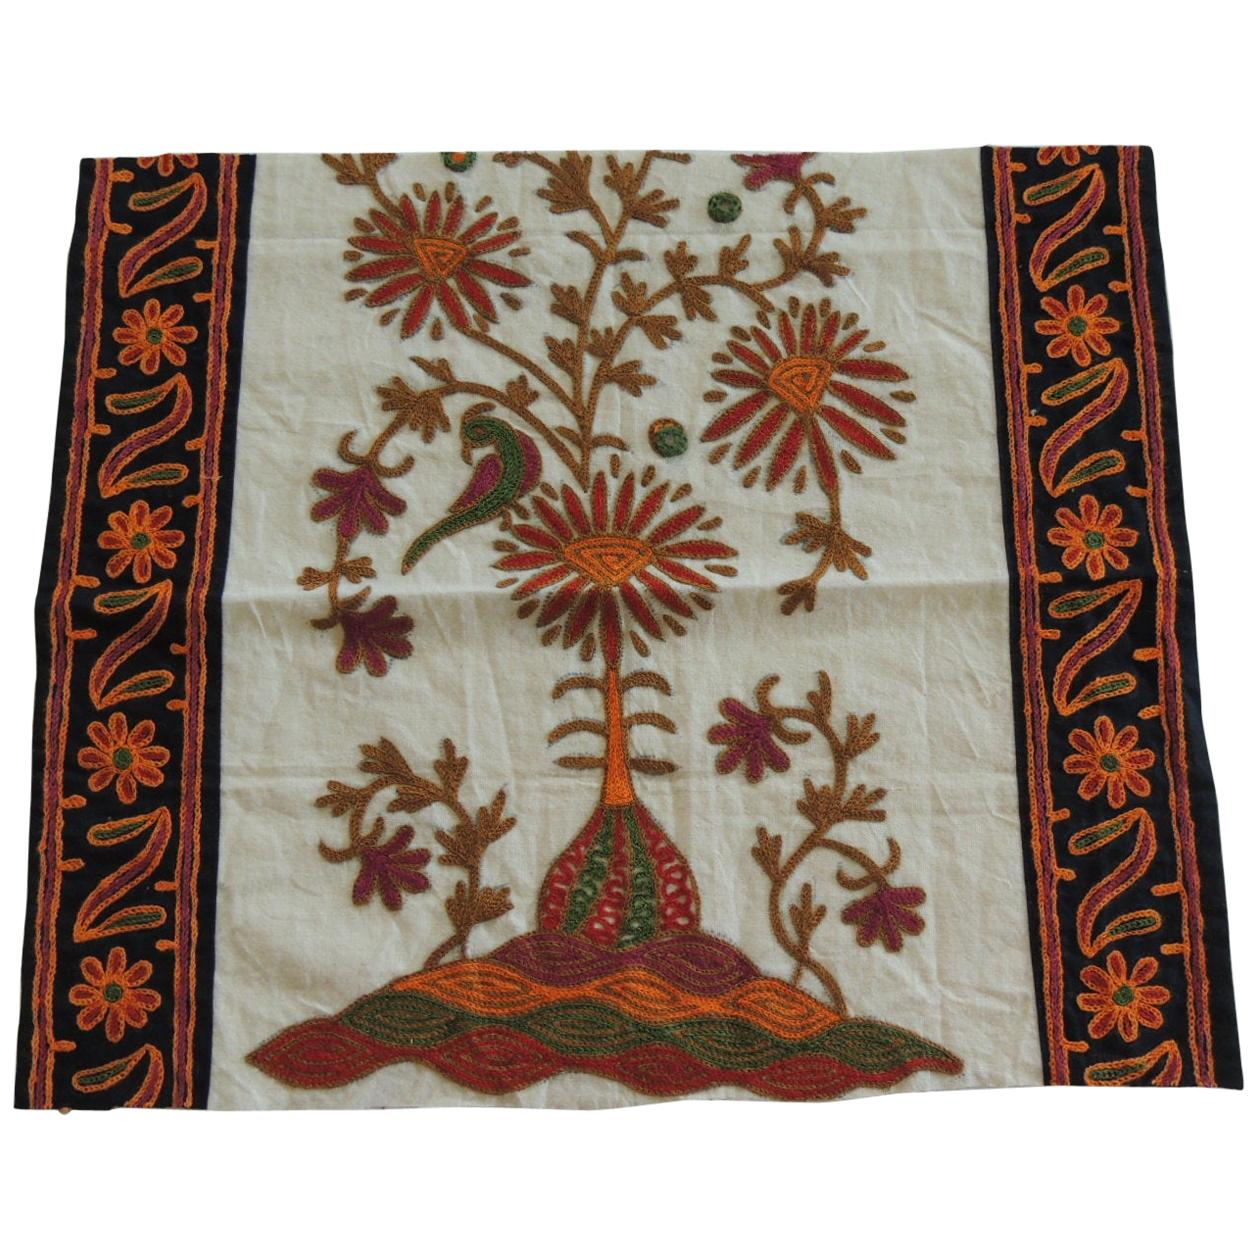 Vintage Embroidered Orange and Green Indian Textile